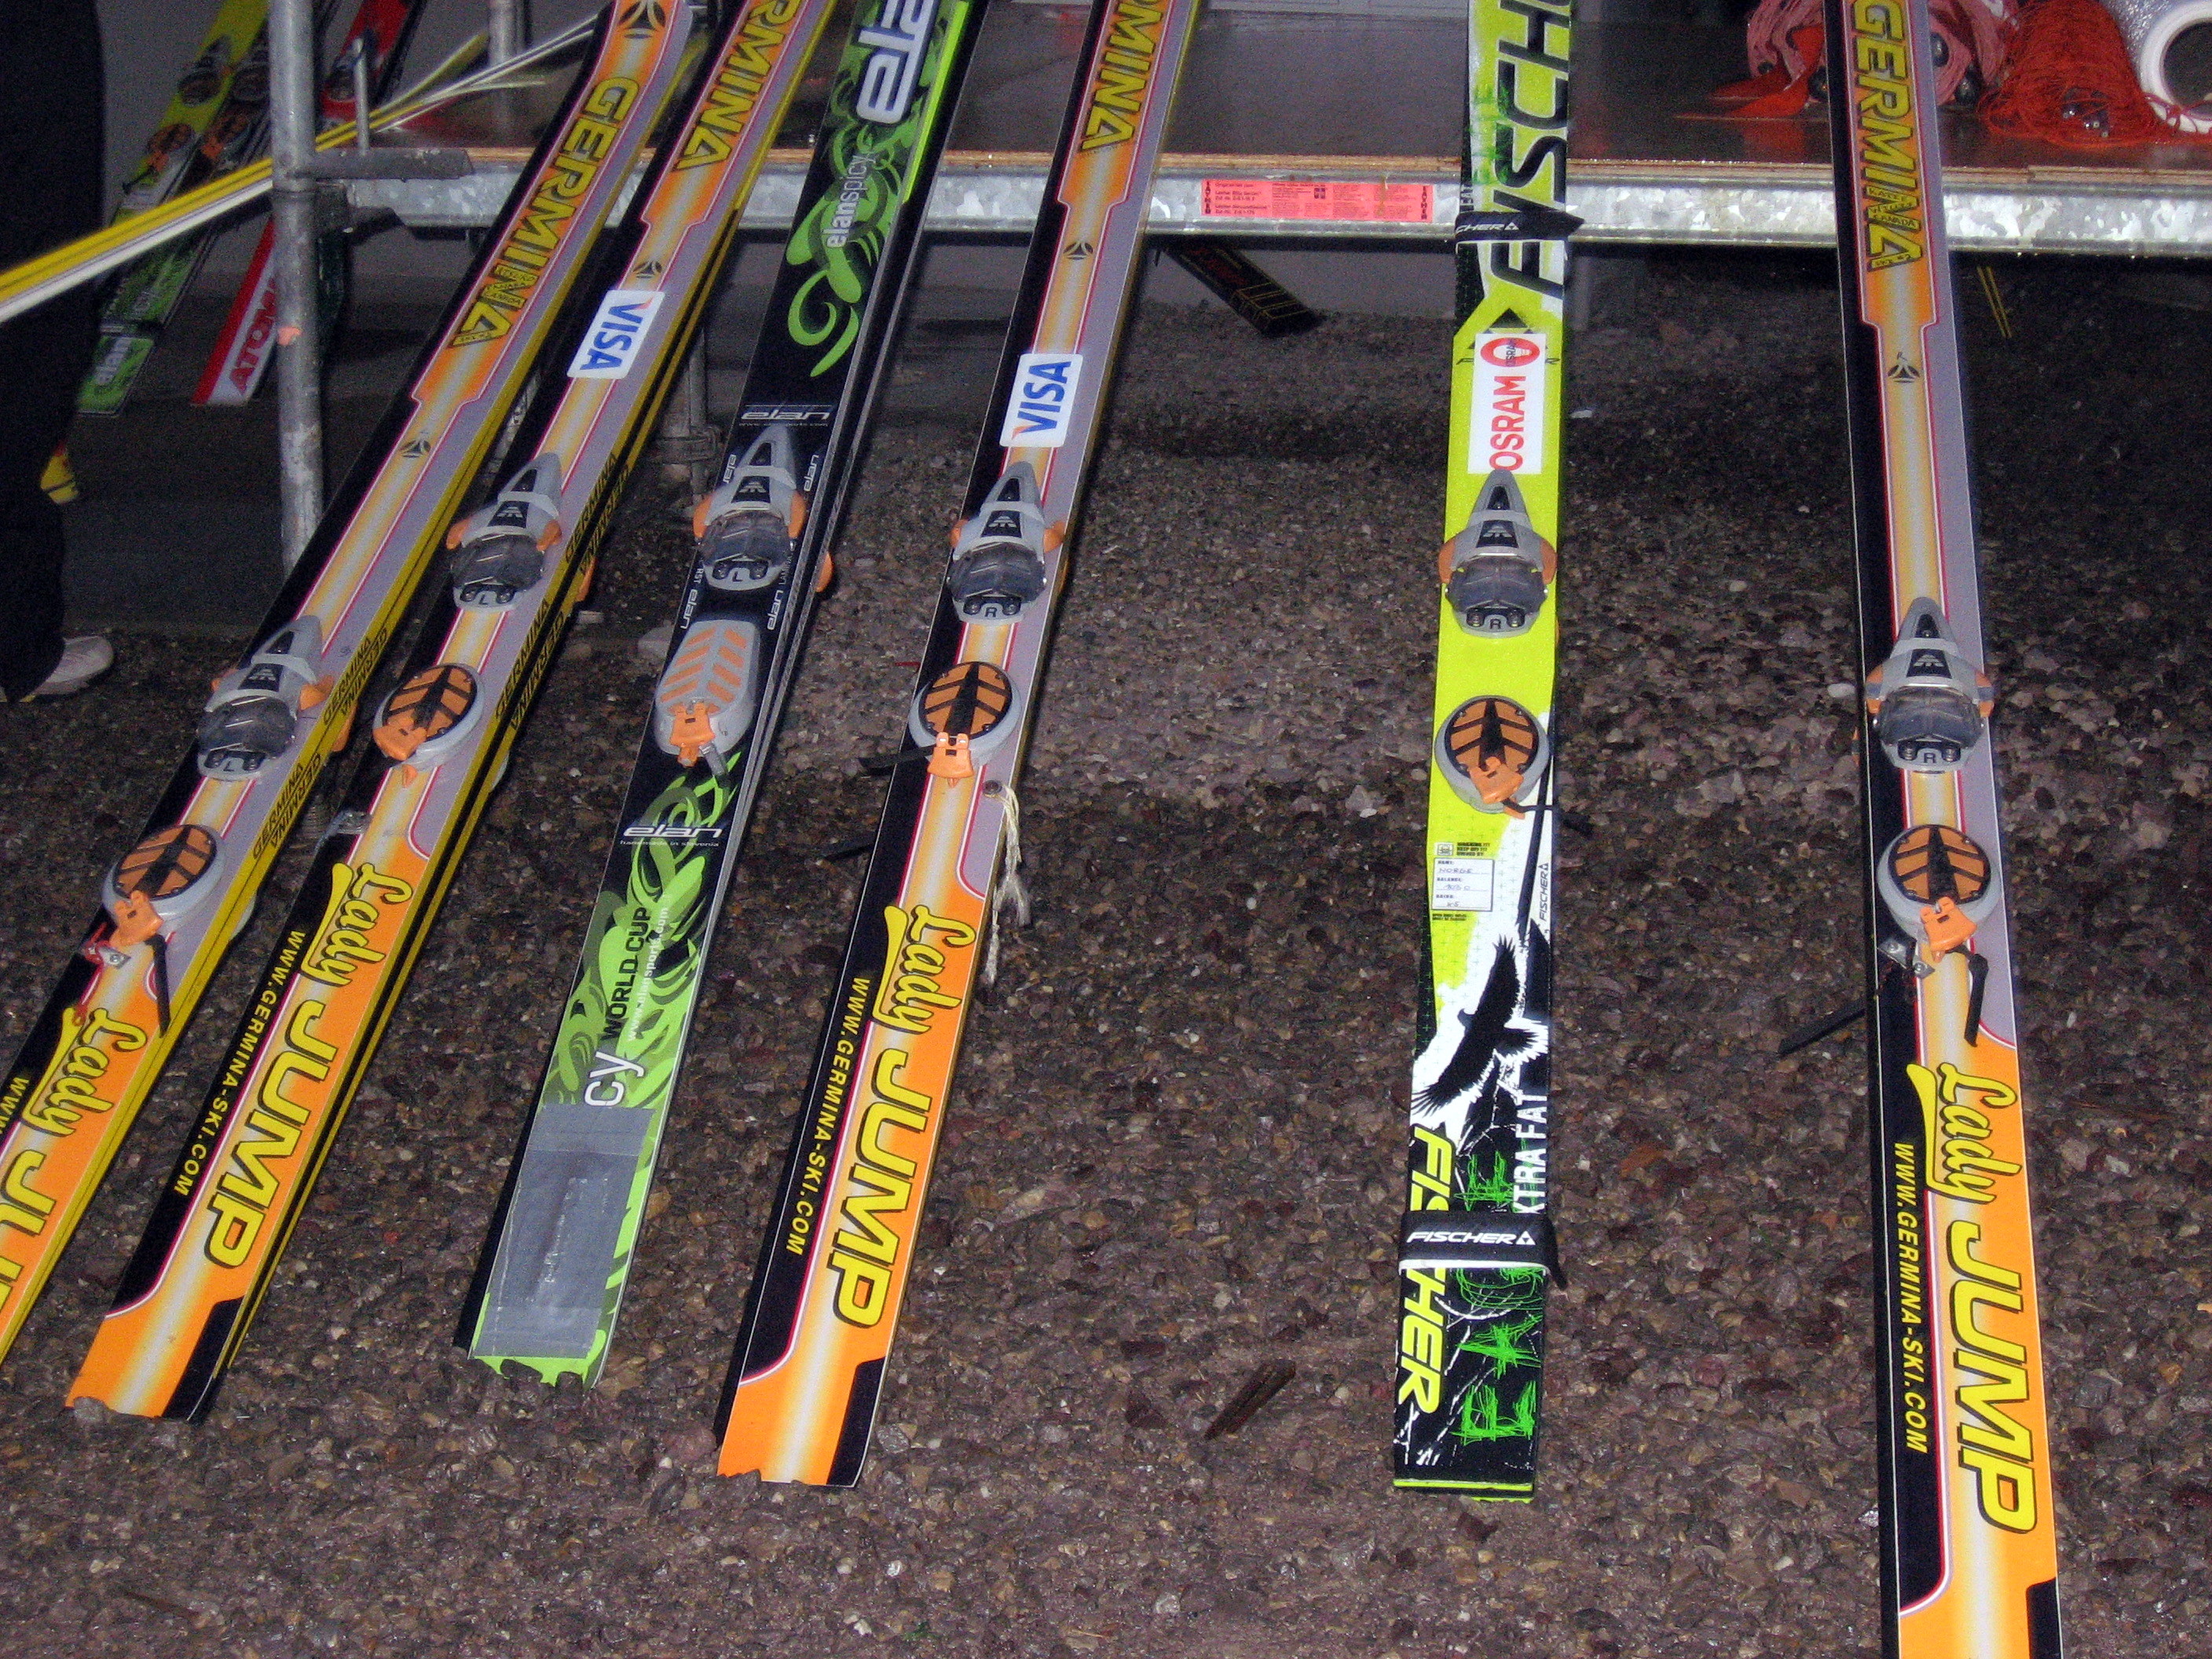 Filebaiersbronn 2008 Jumping Skis Wikimedia Commons in The Most Awesome and also Lovely ski jumping skis pertaining to Motivate